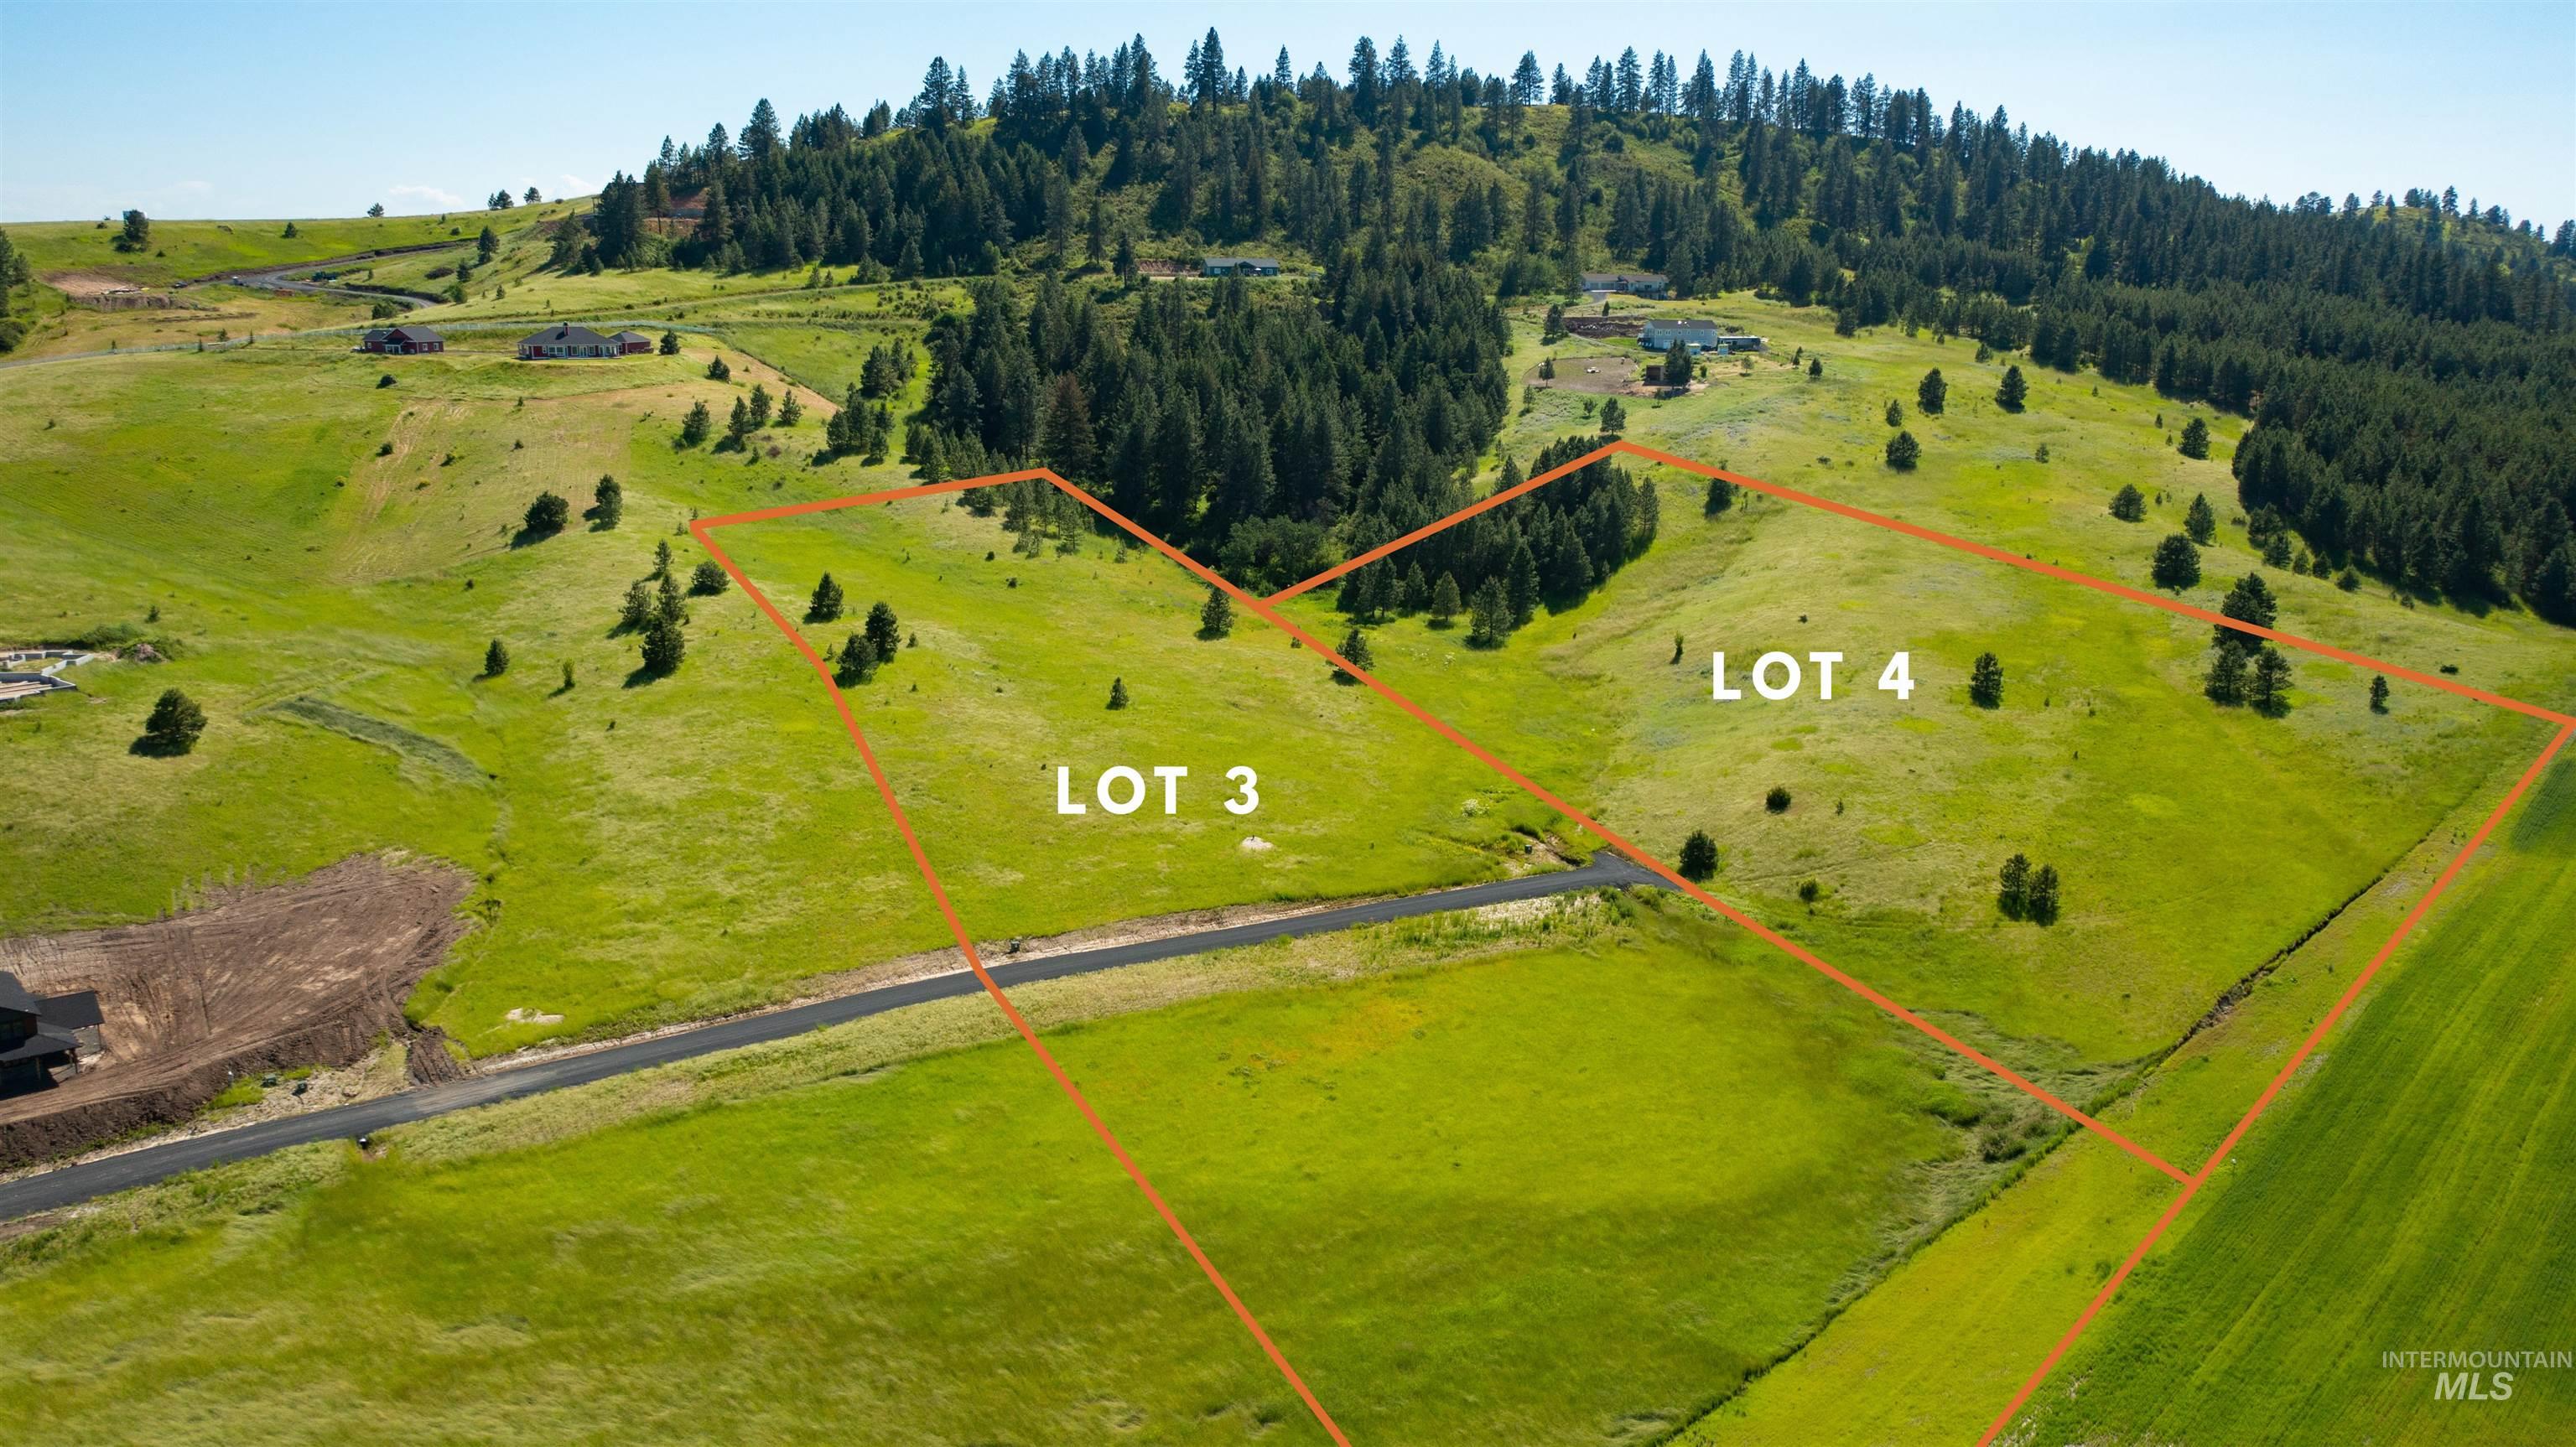 TBD Lot 4 Whoville Lane, Moscow, Idaho 83843, Land For Sale, Price $349,000,MLS 98901299